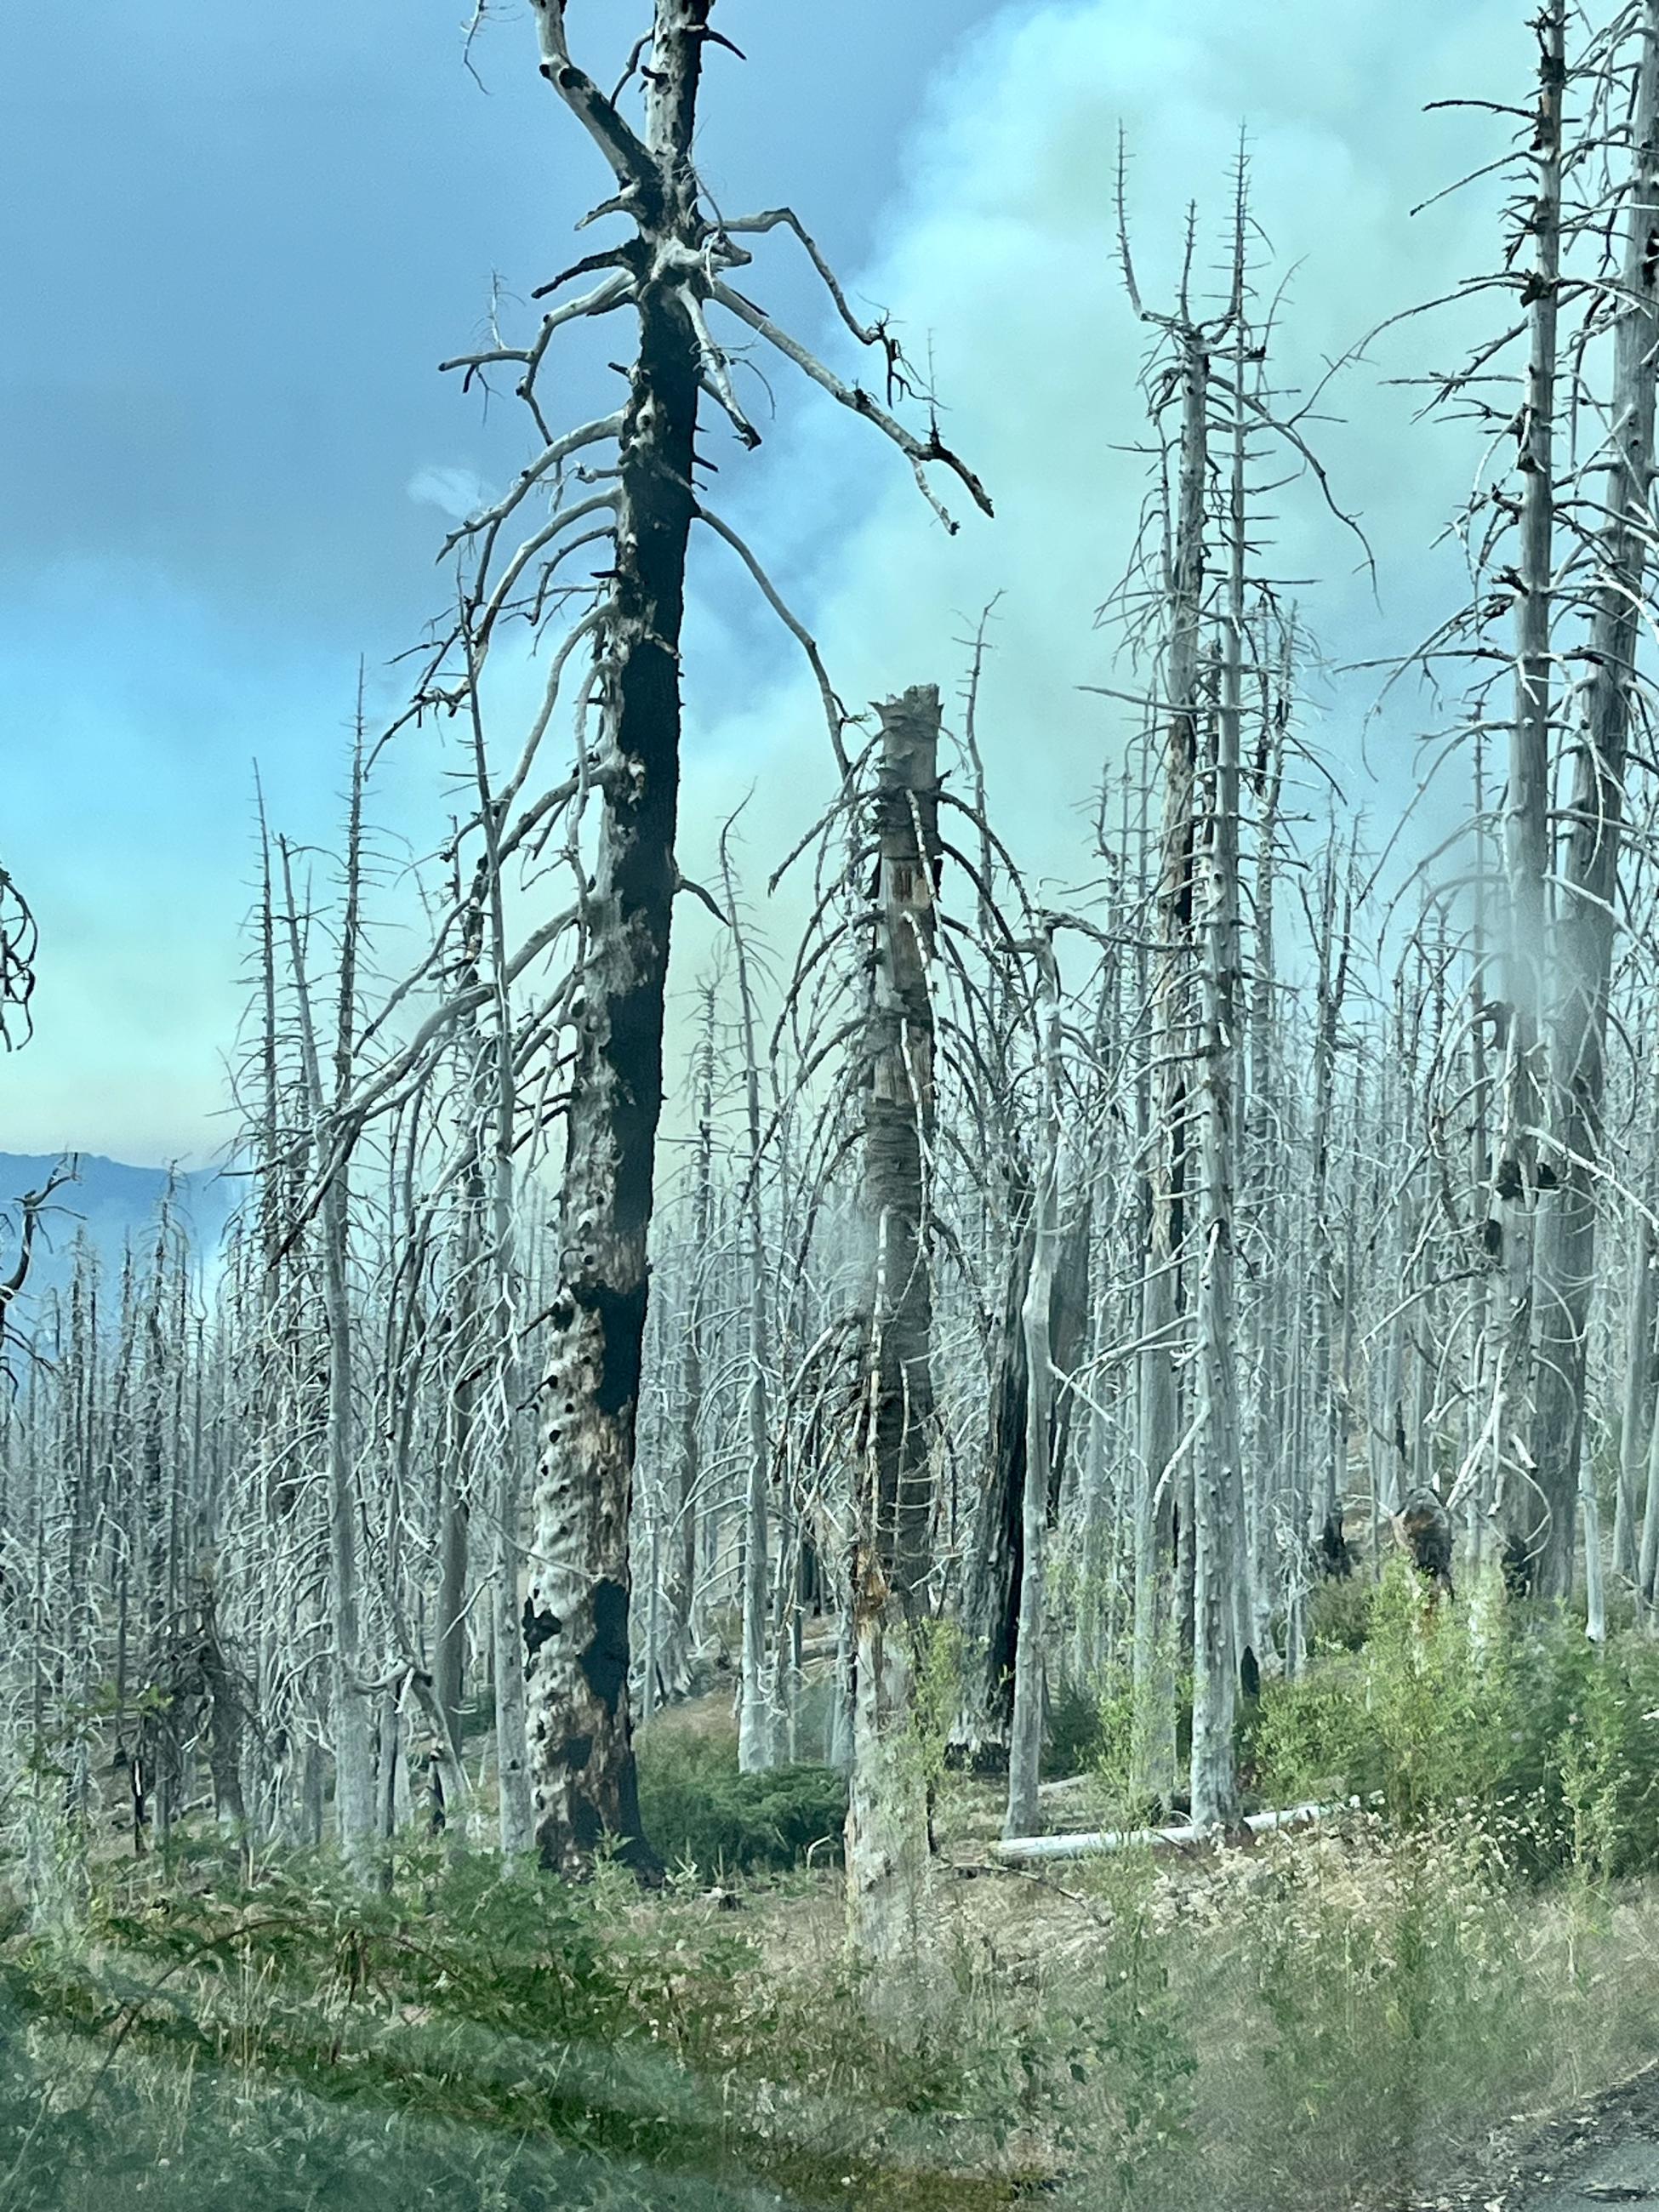 Dead trees from a previous fire stand along a road edge, as smoke lifts in the background.  Dead Trees make firefighting hazardous, and difficult to control